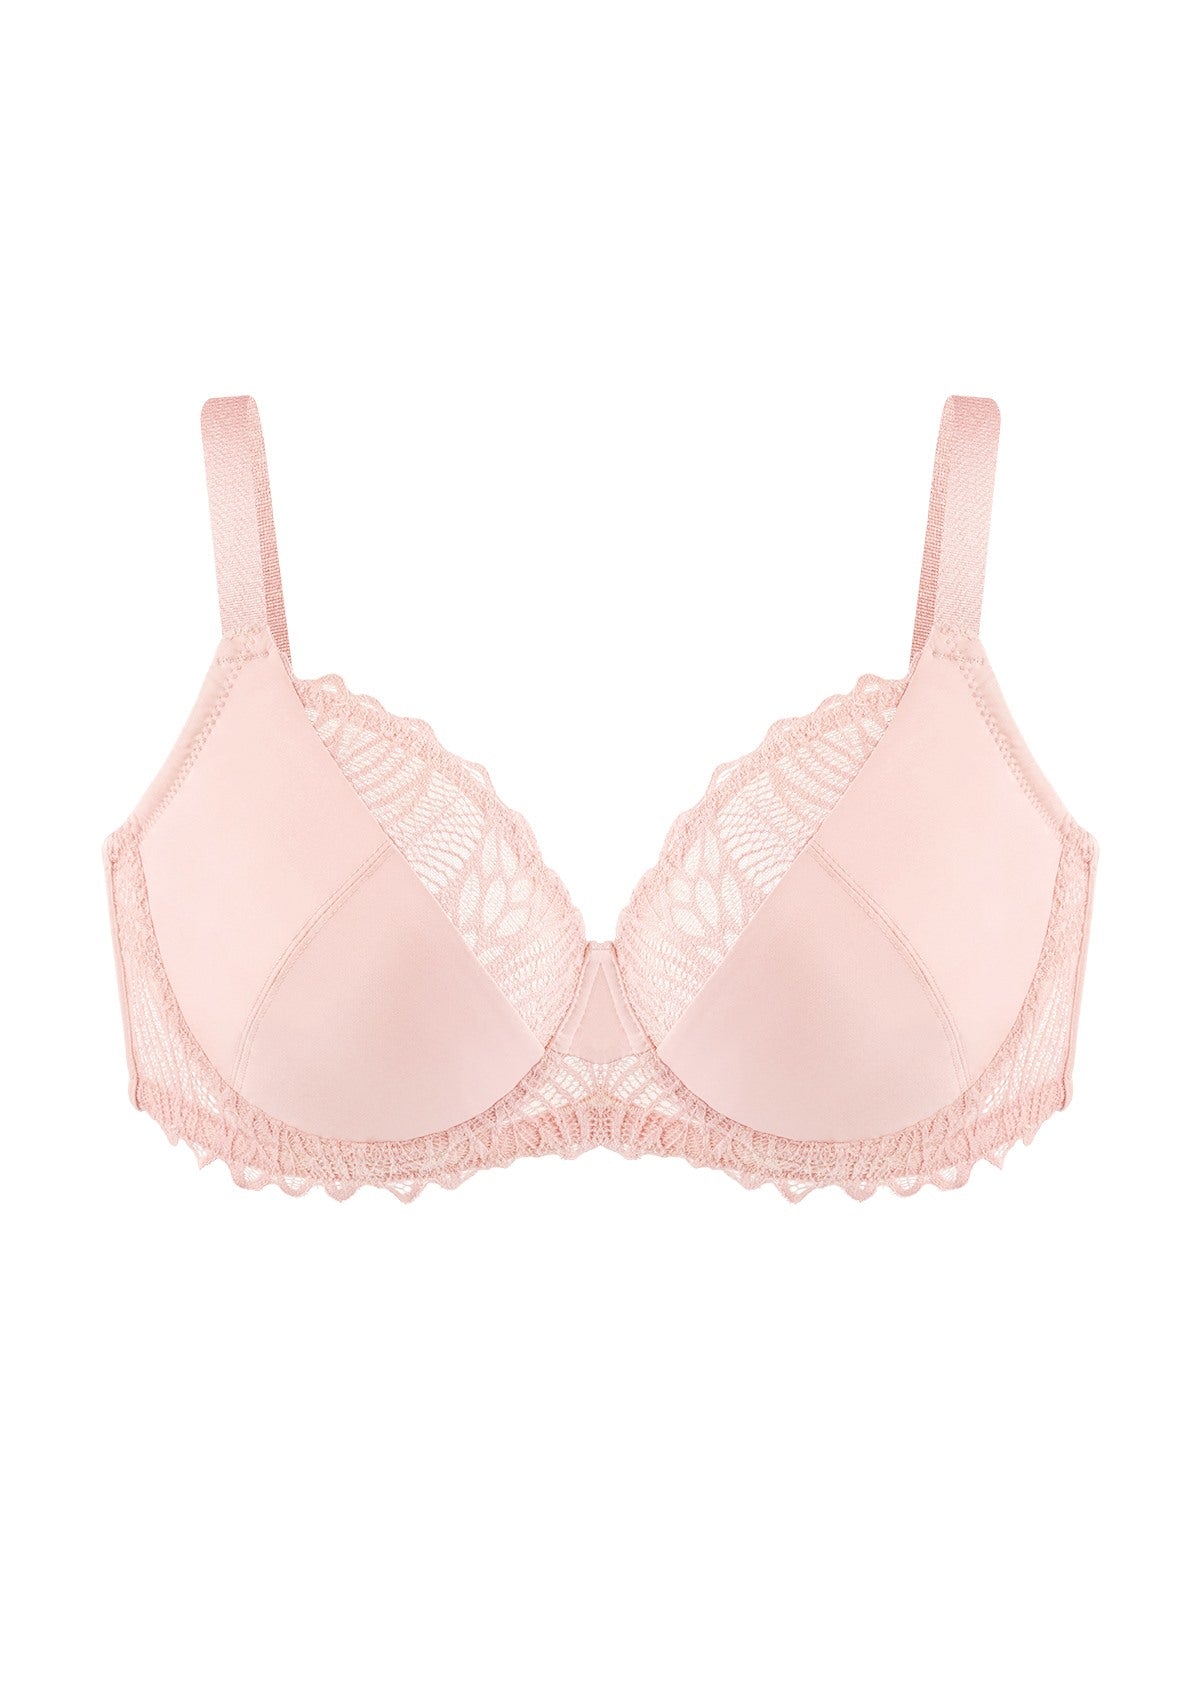 HSIA Pretty Secrets Lace-Trimmed Full Coverage Underwire Bra For Support - Light Pink / 40 / C